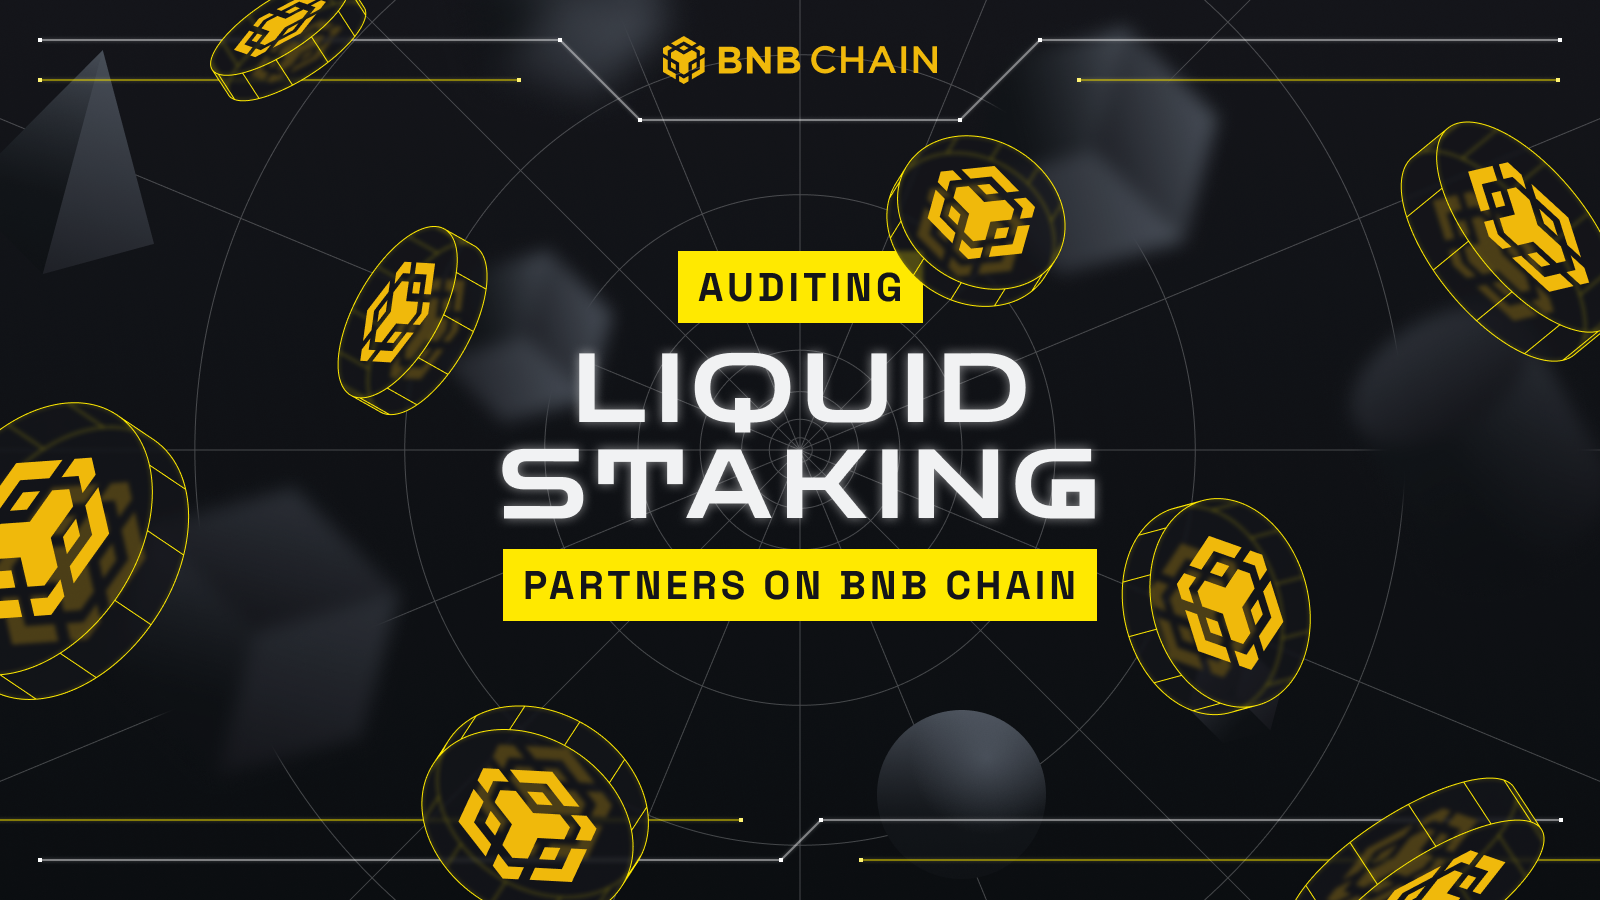 Auditing Liquid Staking Partners on BNB Chain